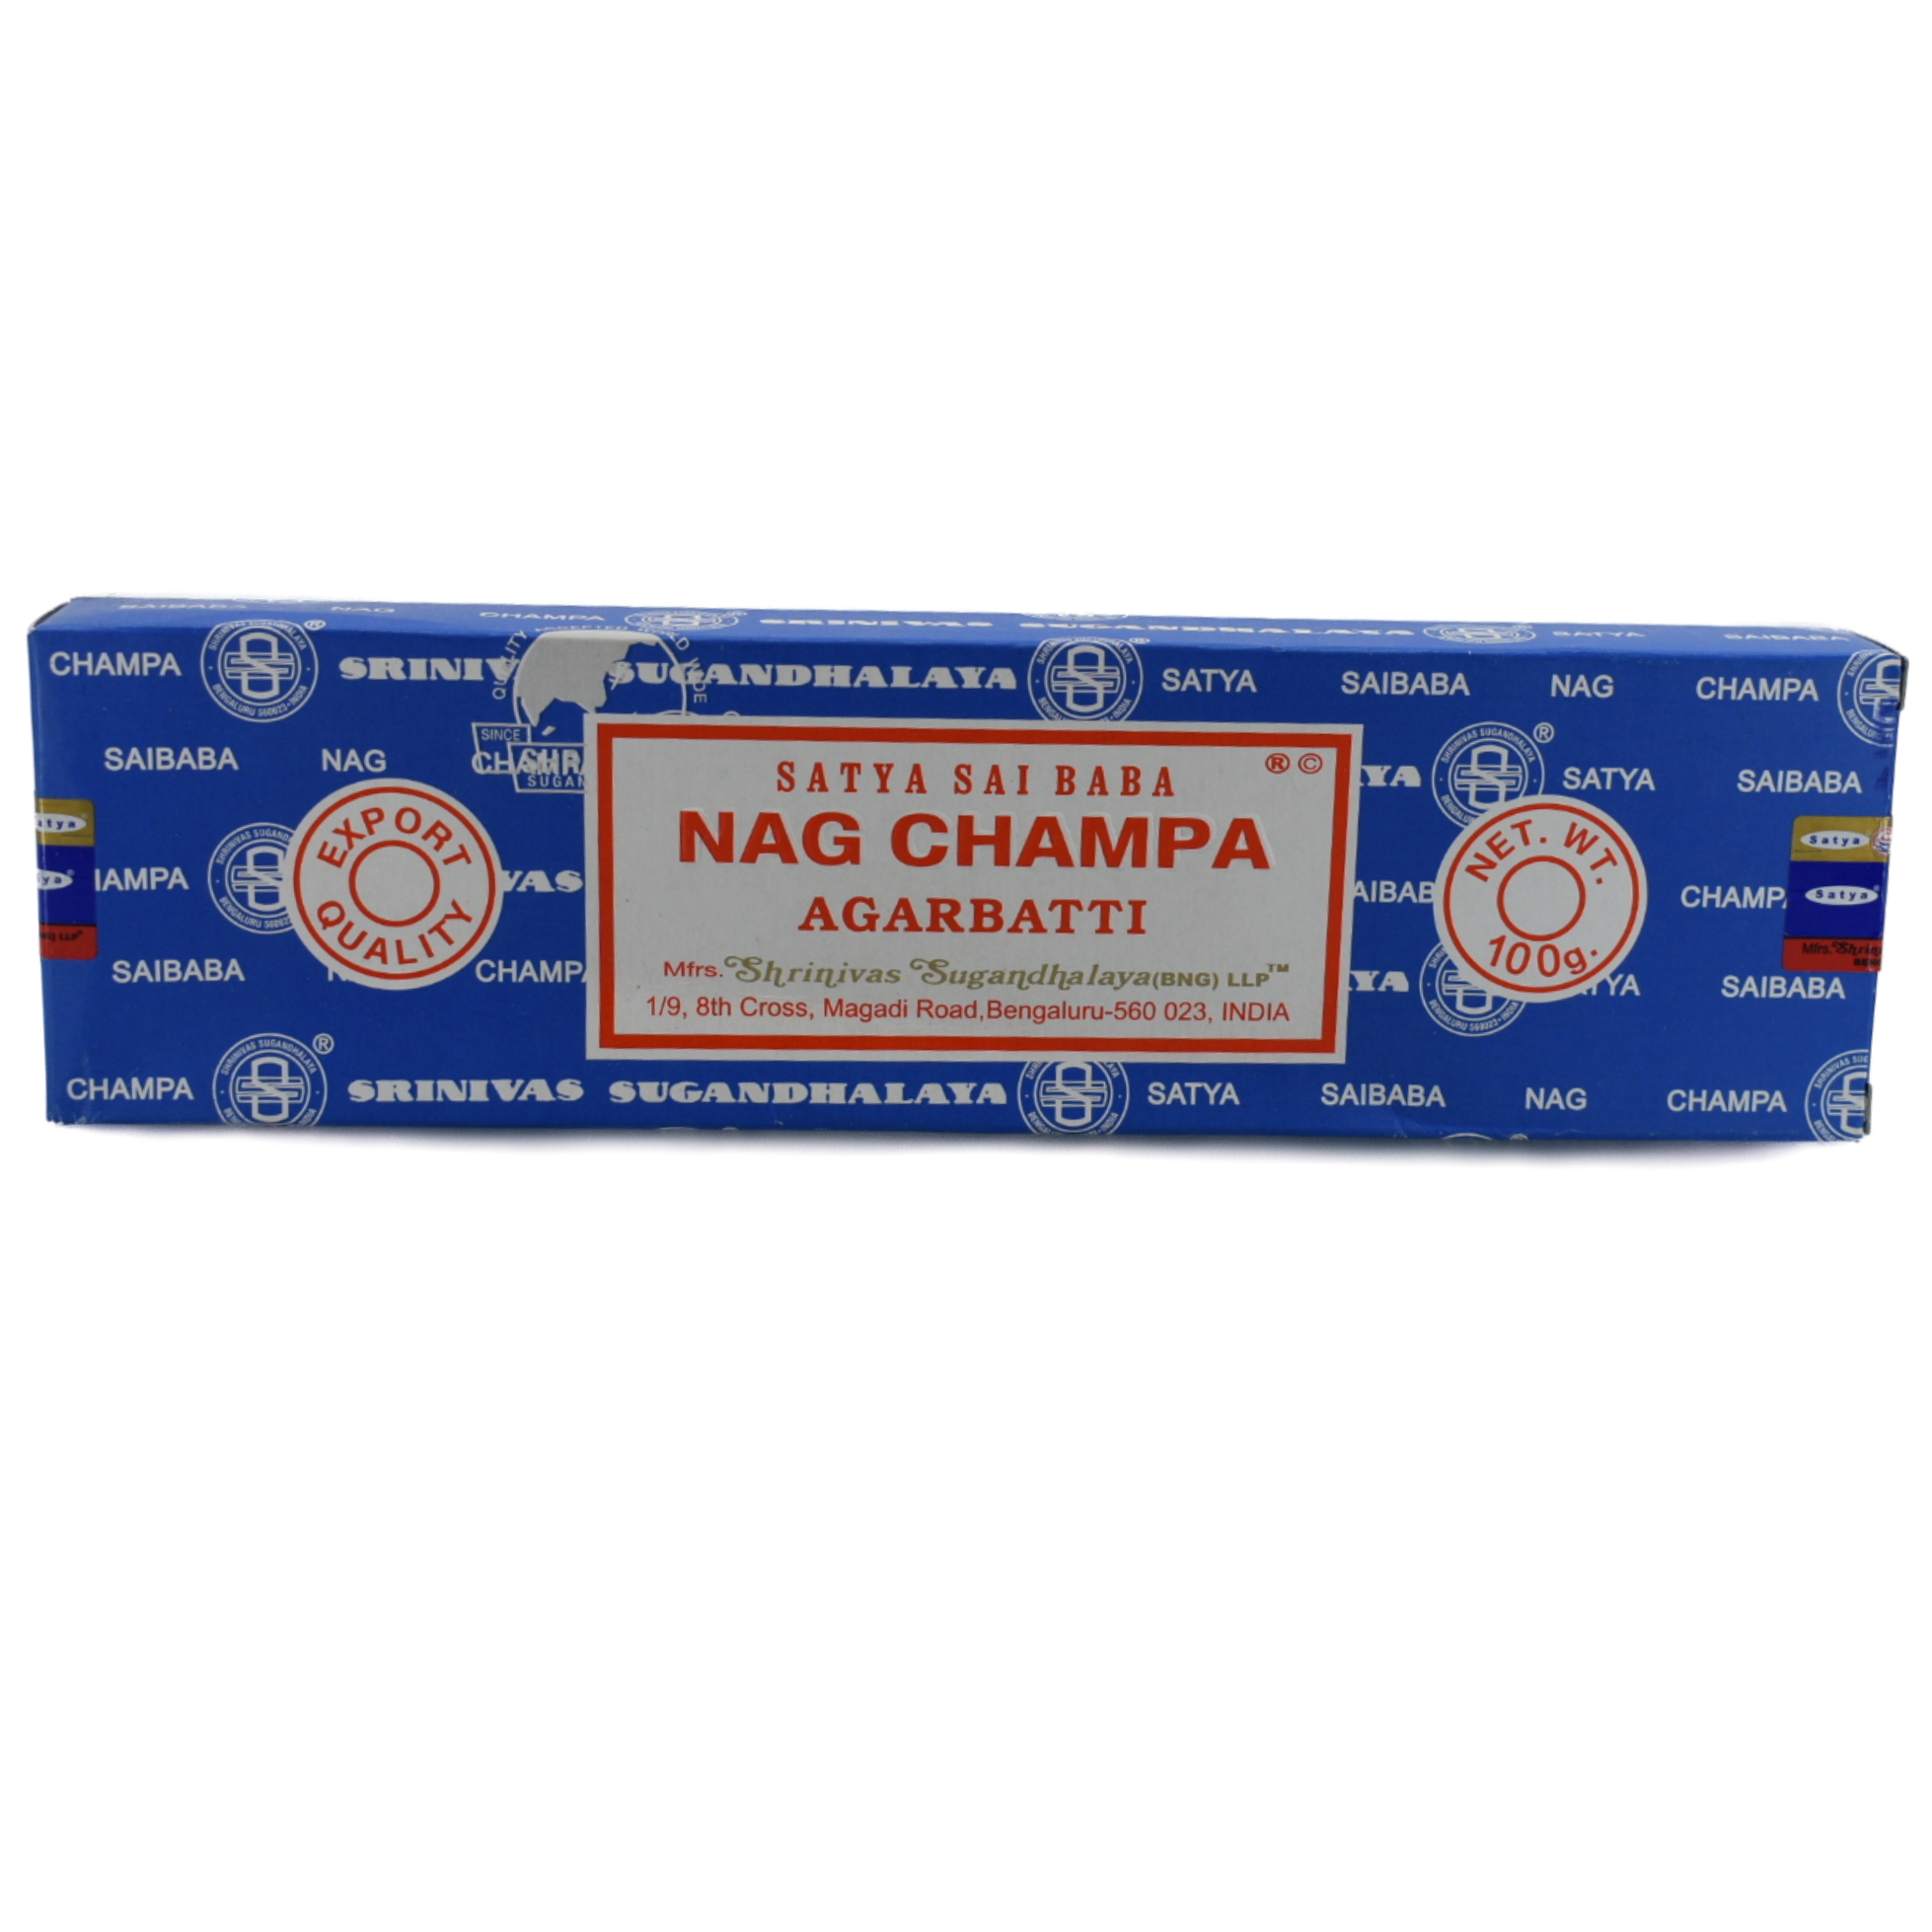 Nag Champa 100gr Incense Sticks.  A dark blue box with a white rectangle in the middle. The red lettering and frame just inside the border. The lettering has the company name and title; Satya Sai Baba, Nag Champa, Agarbatti. Below the title is the manufacturer&